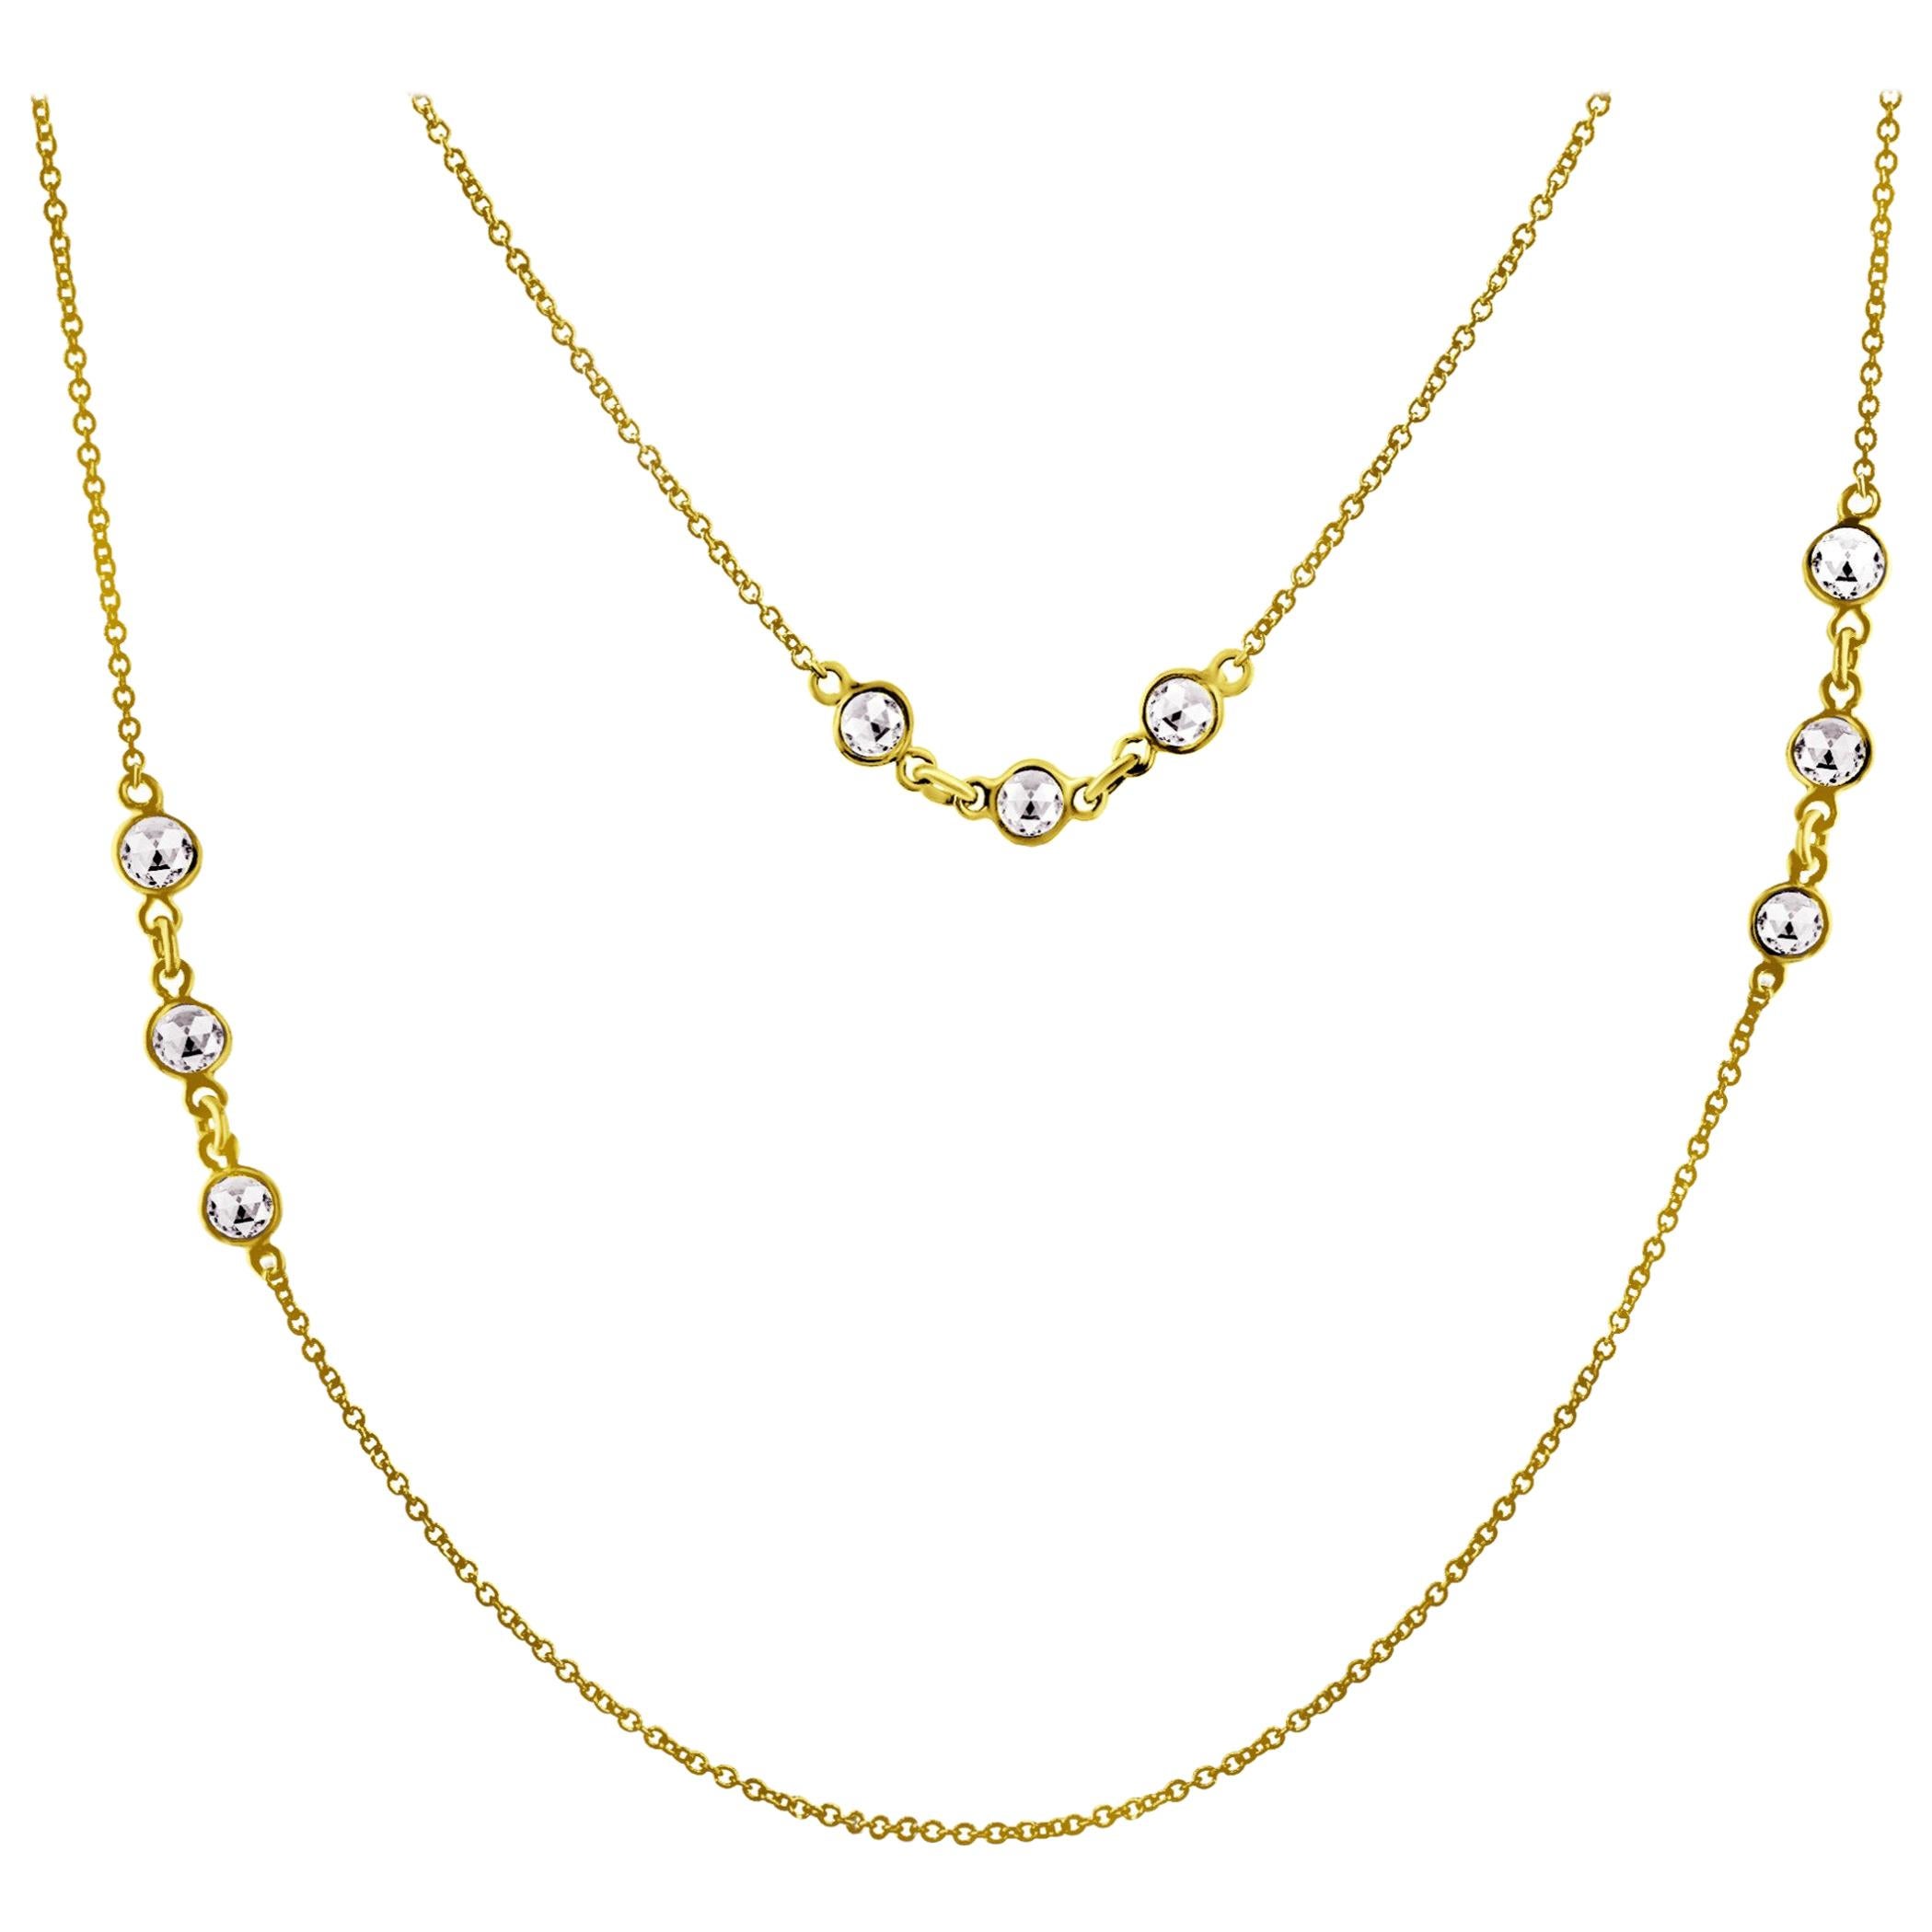 Rock & Divine Dawn Collection Spring River 36 Necklace 18 Kt Yellow Gold 1.1 Ctw